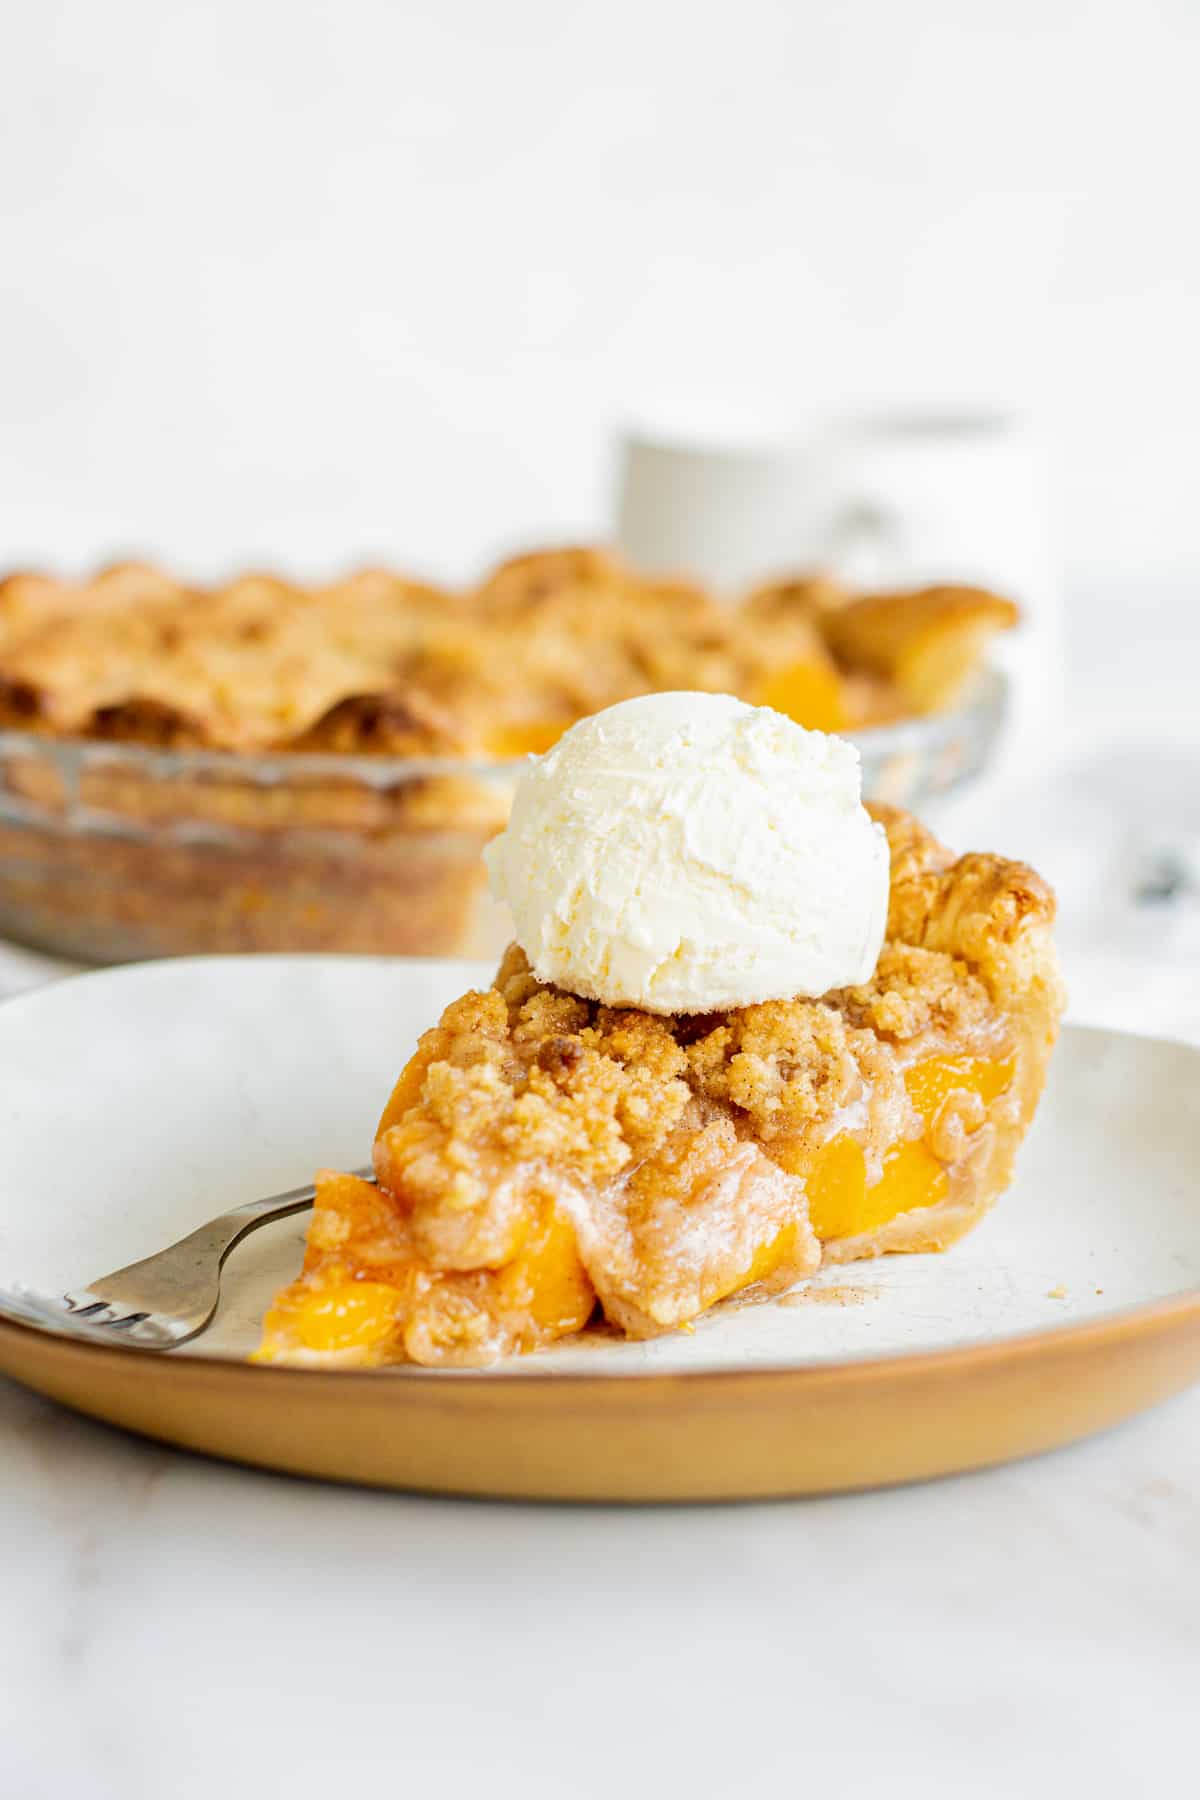 Peach Pie Recipe With Canned Peaches